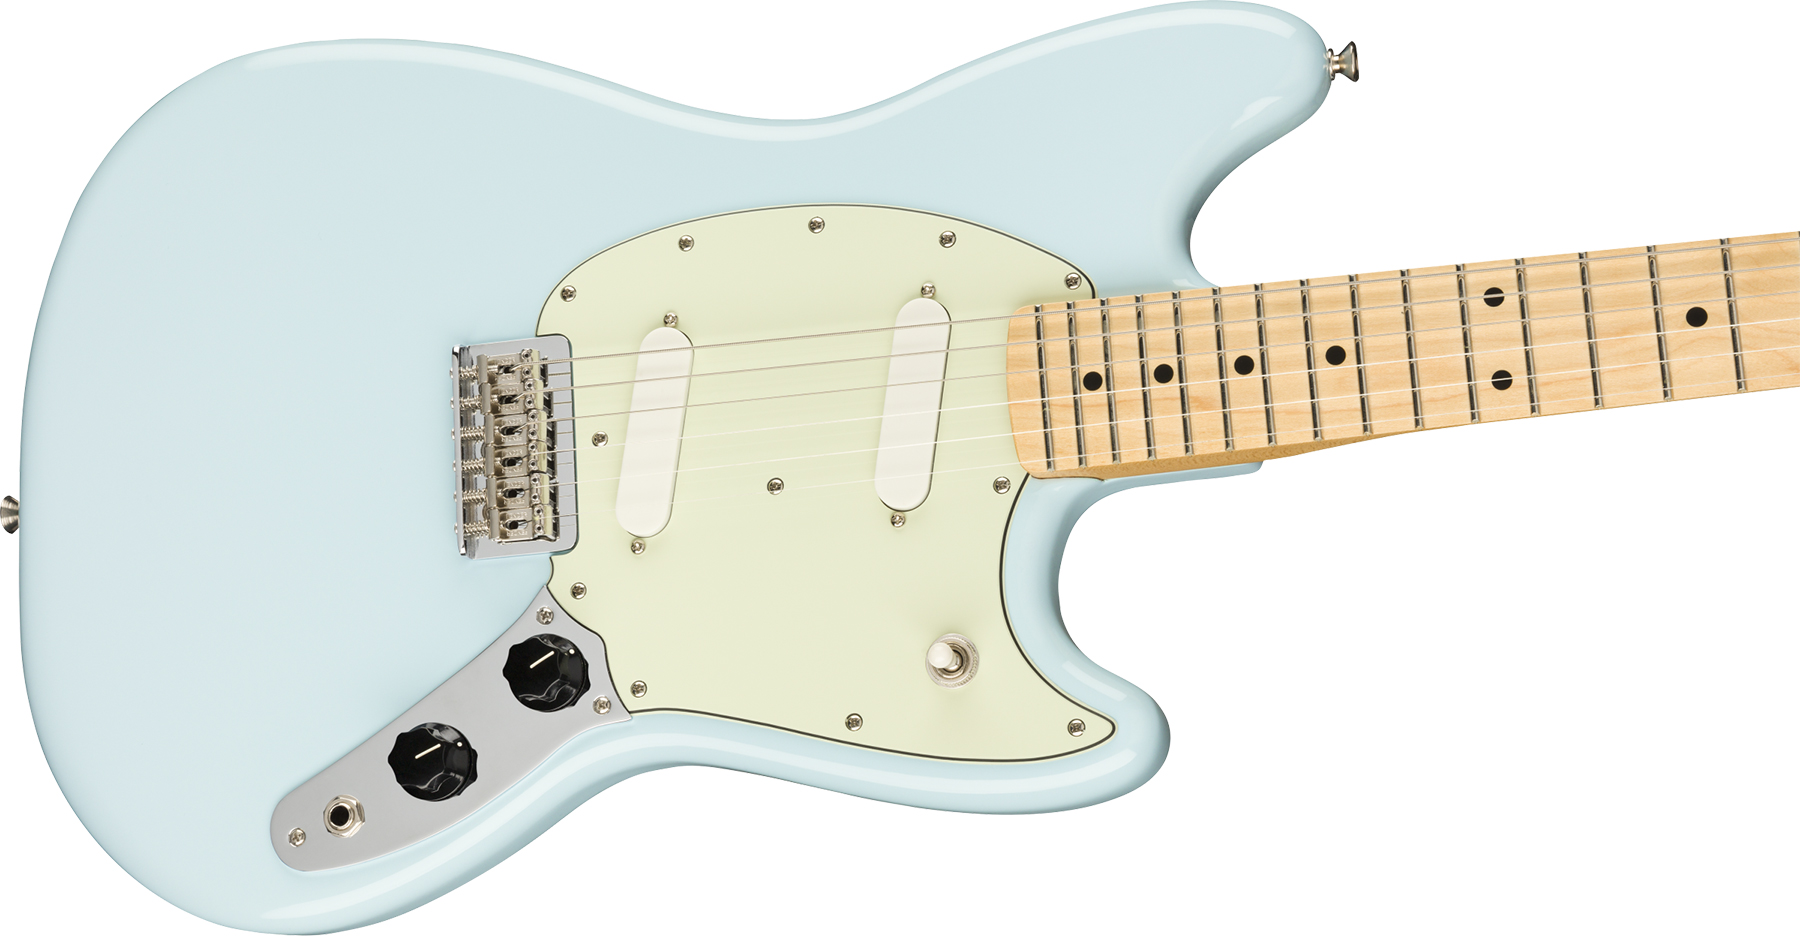 Fender Mustang Player Mex Ht Ss Mn - Surf Blue - Retro rock electric guitar - Variation 2